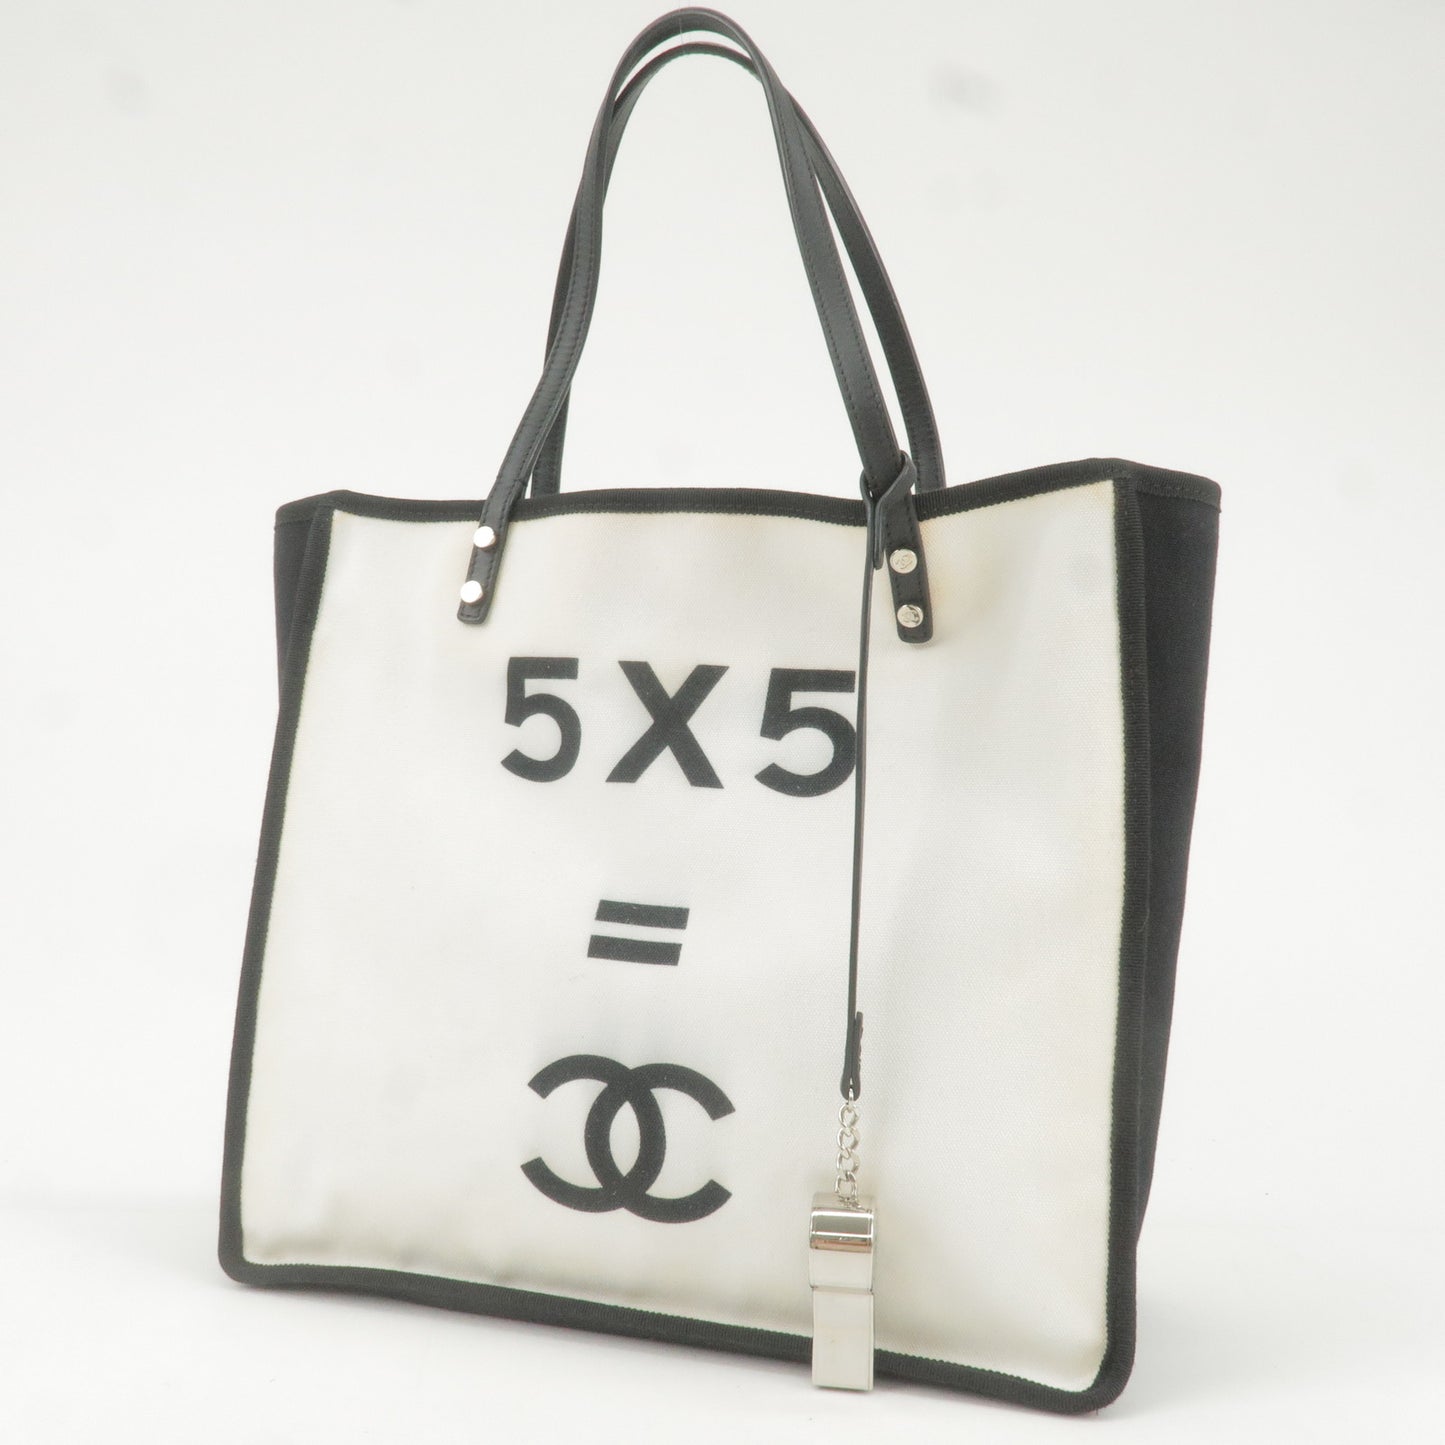 Chanel Let's Lemon Straight Canvas Leather Tote Bag A92884